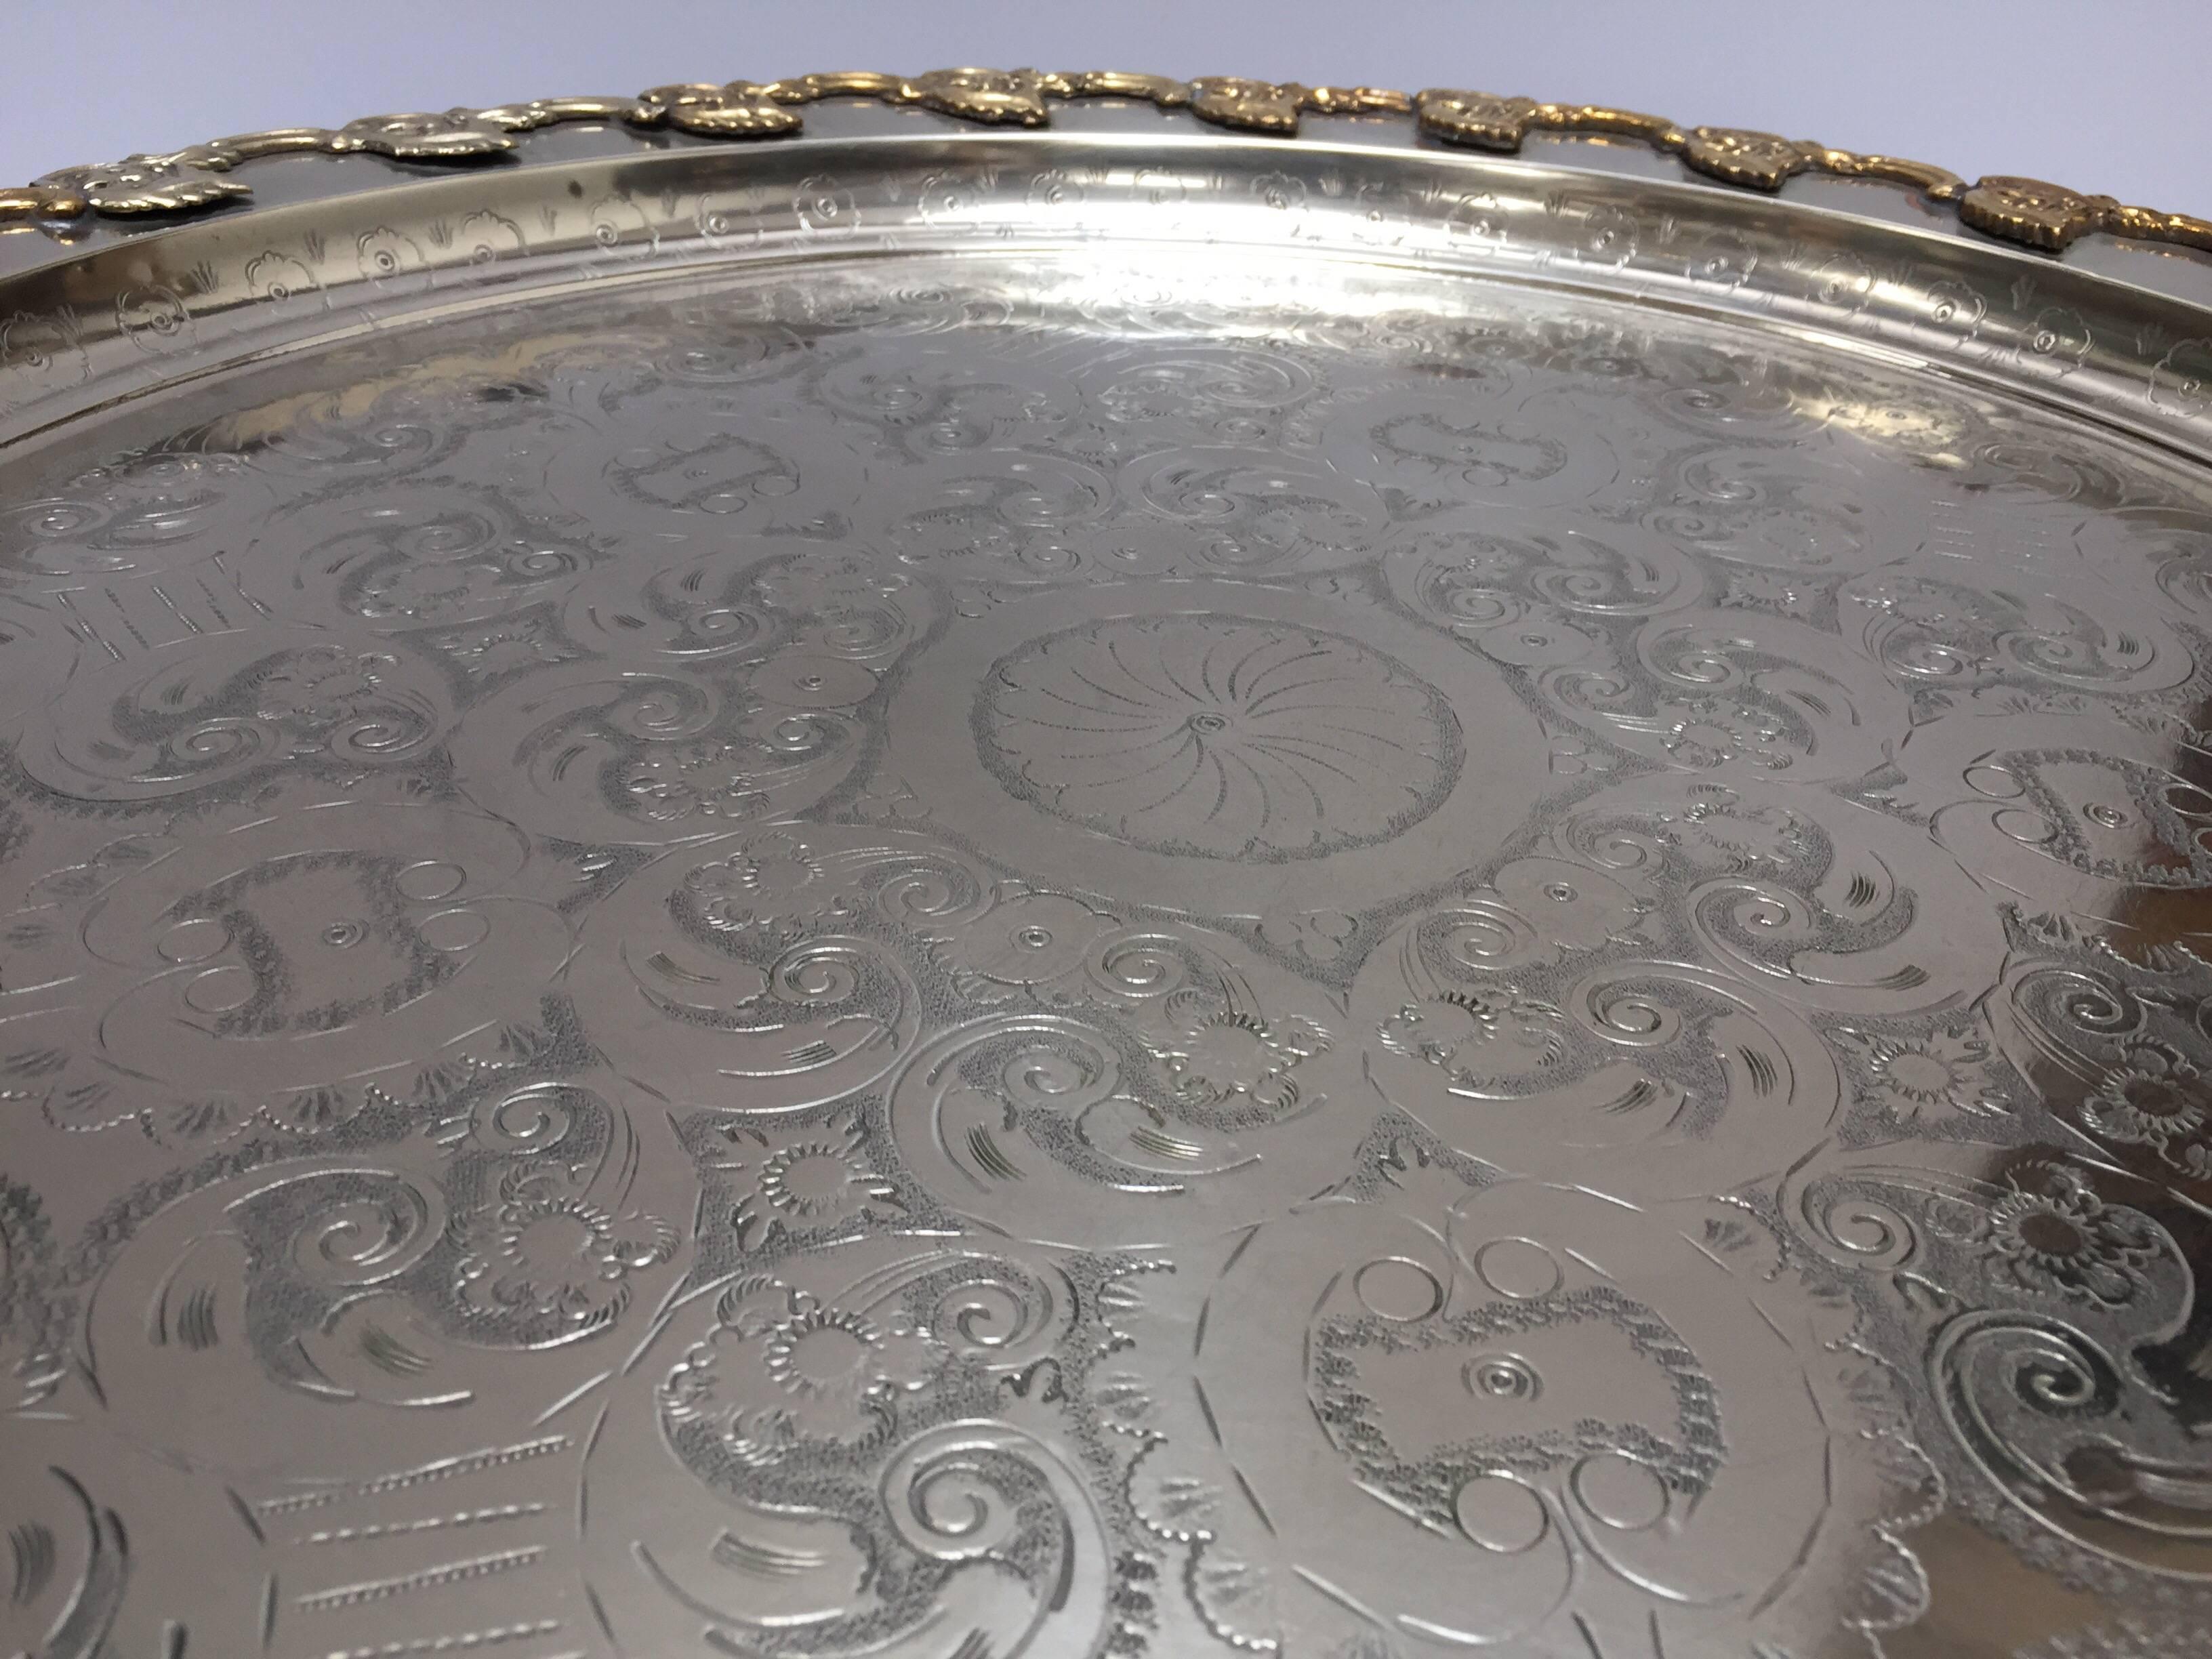 Mid-20th Century Moroccan Handcrafted Silver Round Tray For Sale